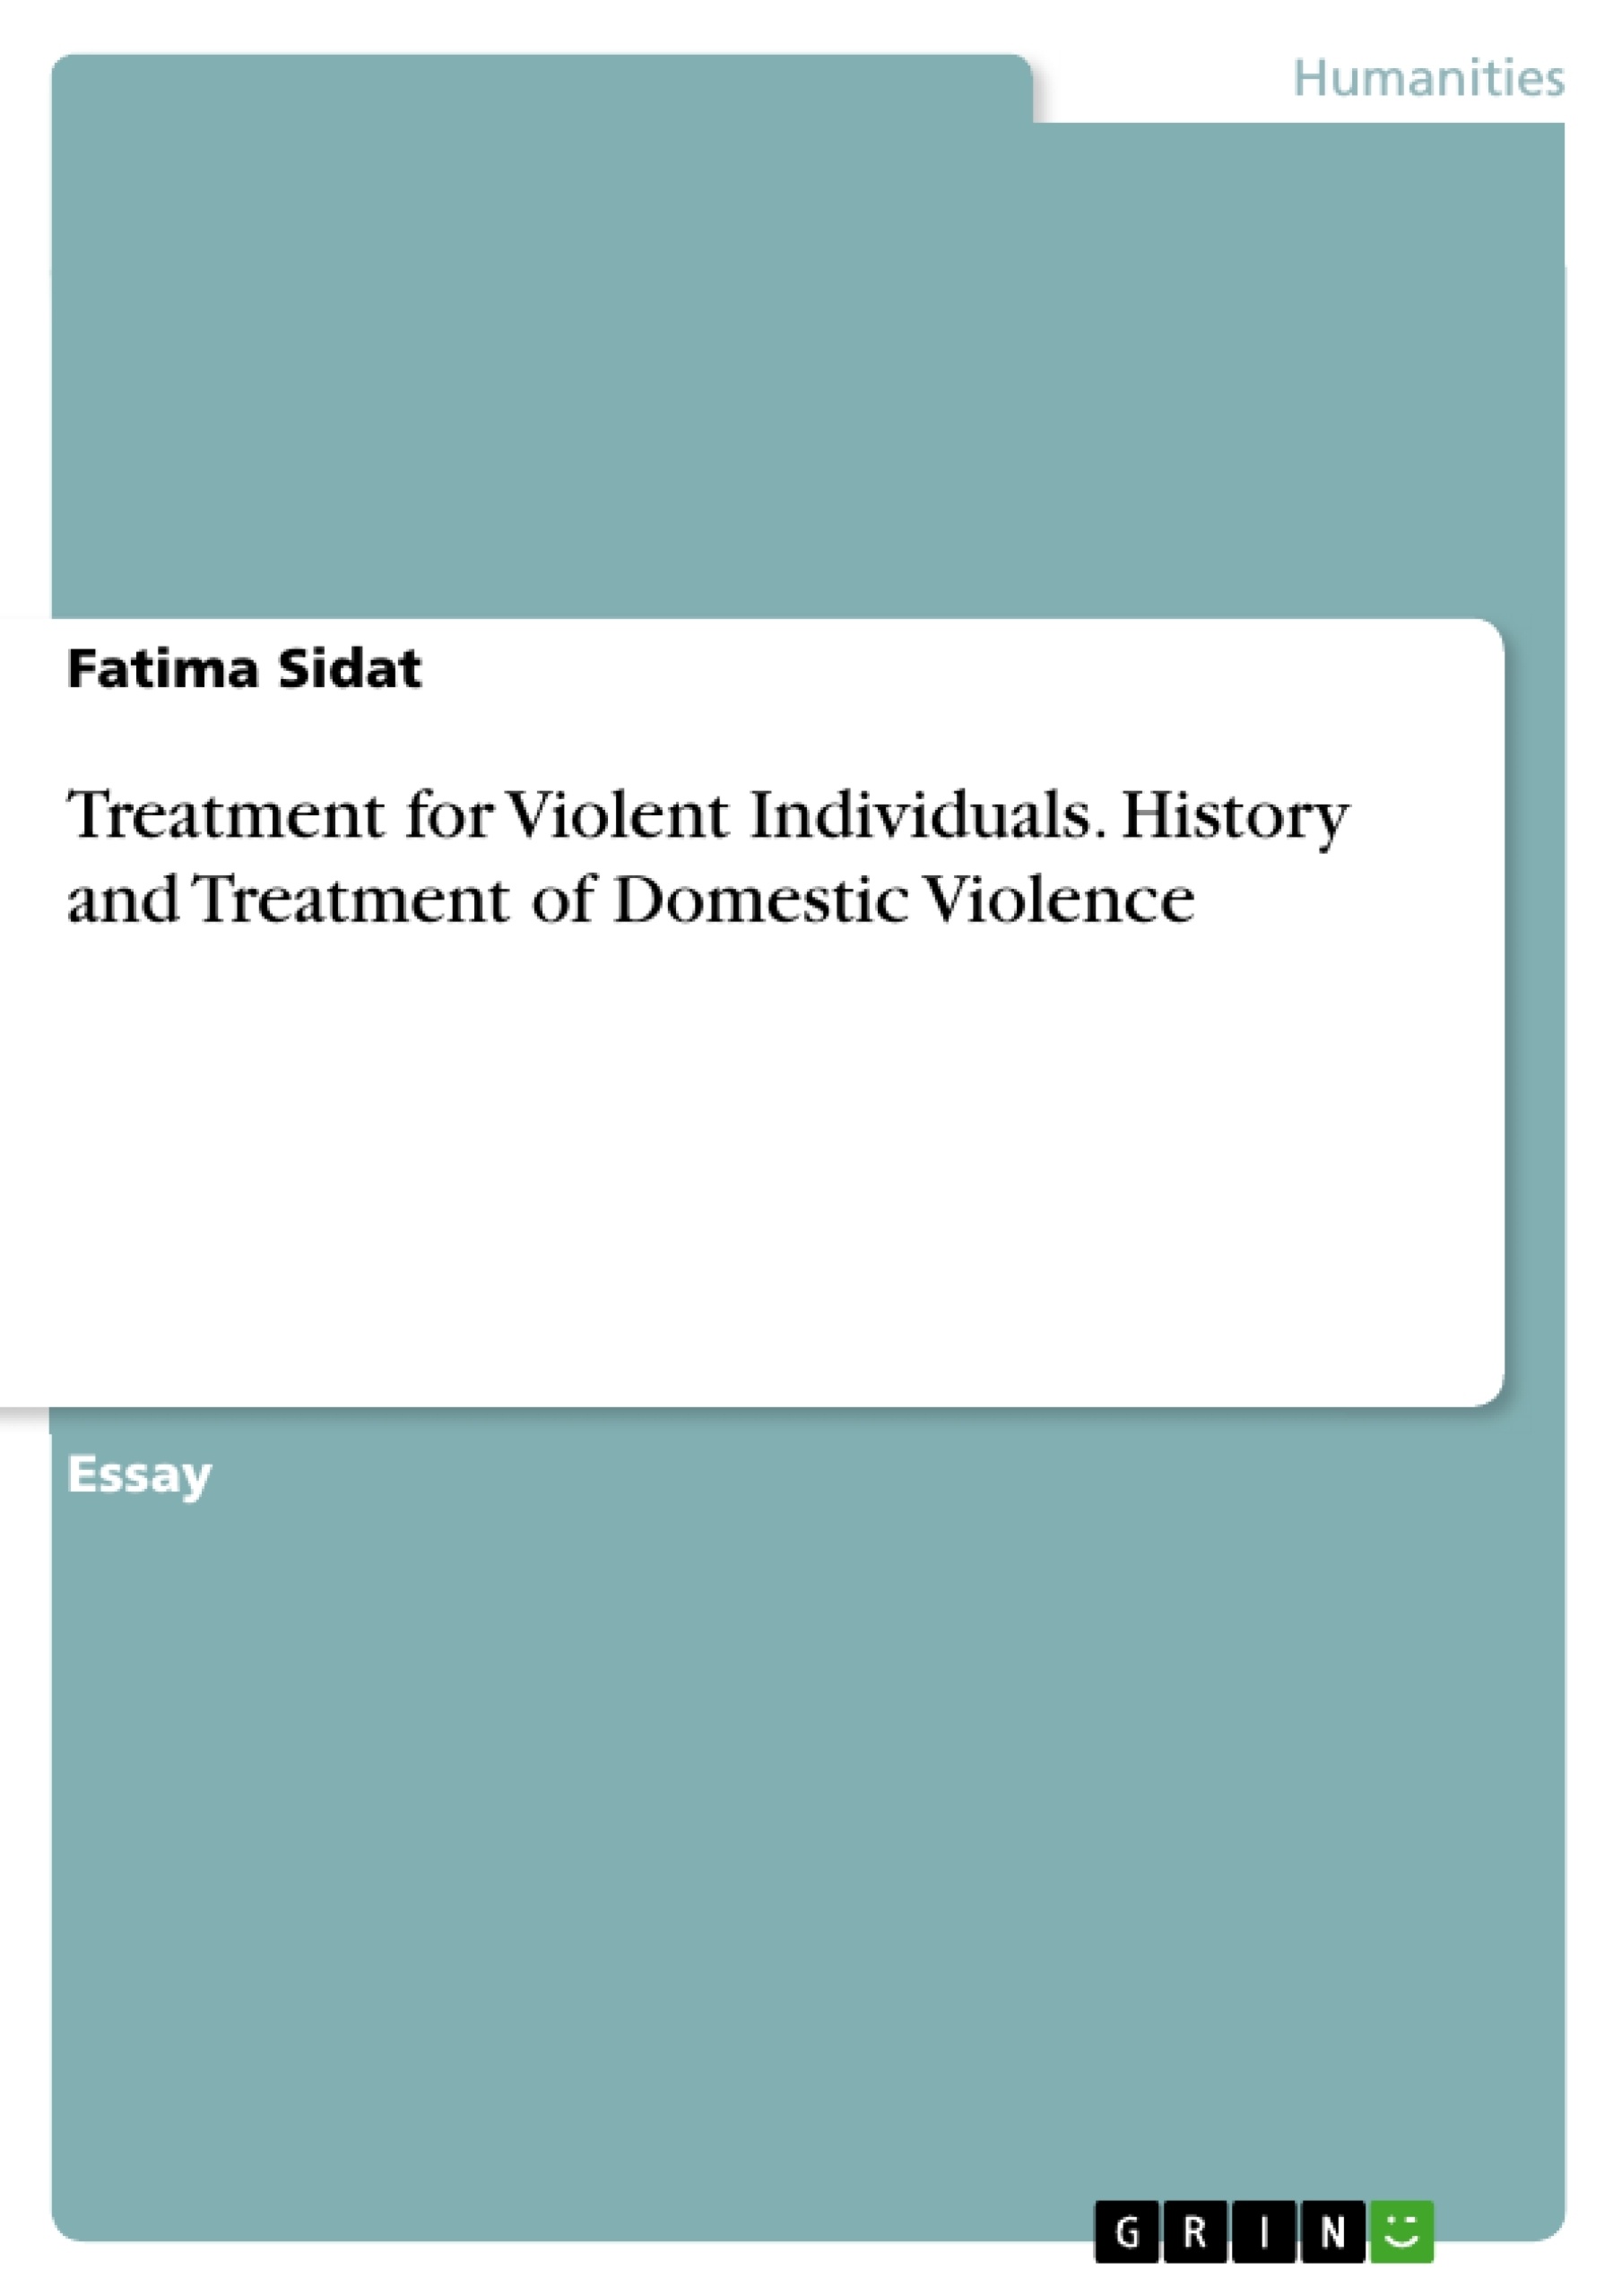 Title: Treatment for Violent Individuals. History and Treatment of Domestic Violence